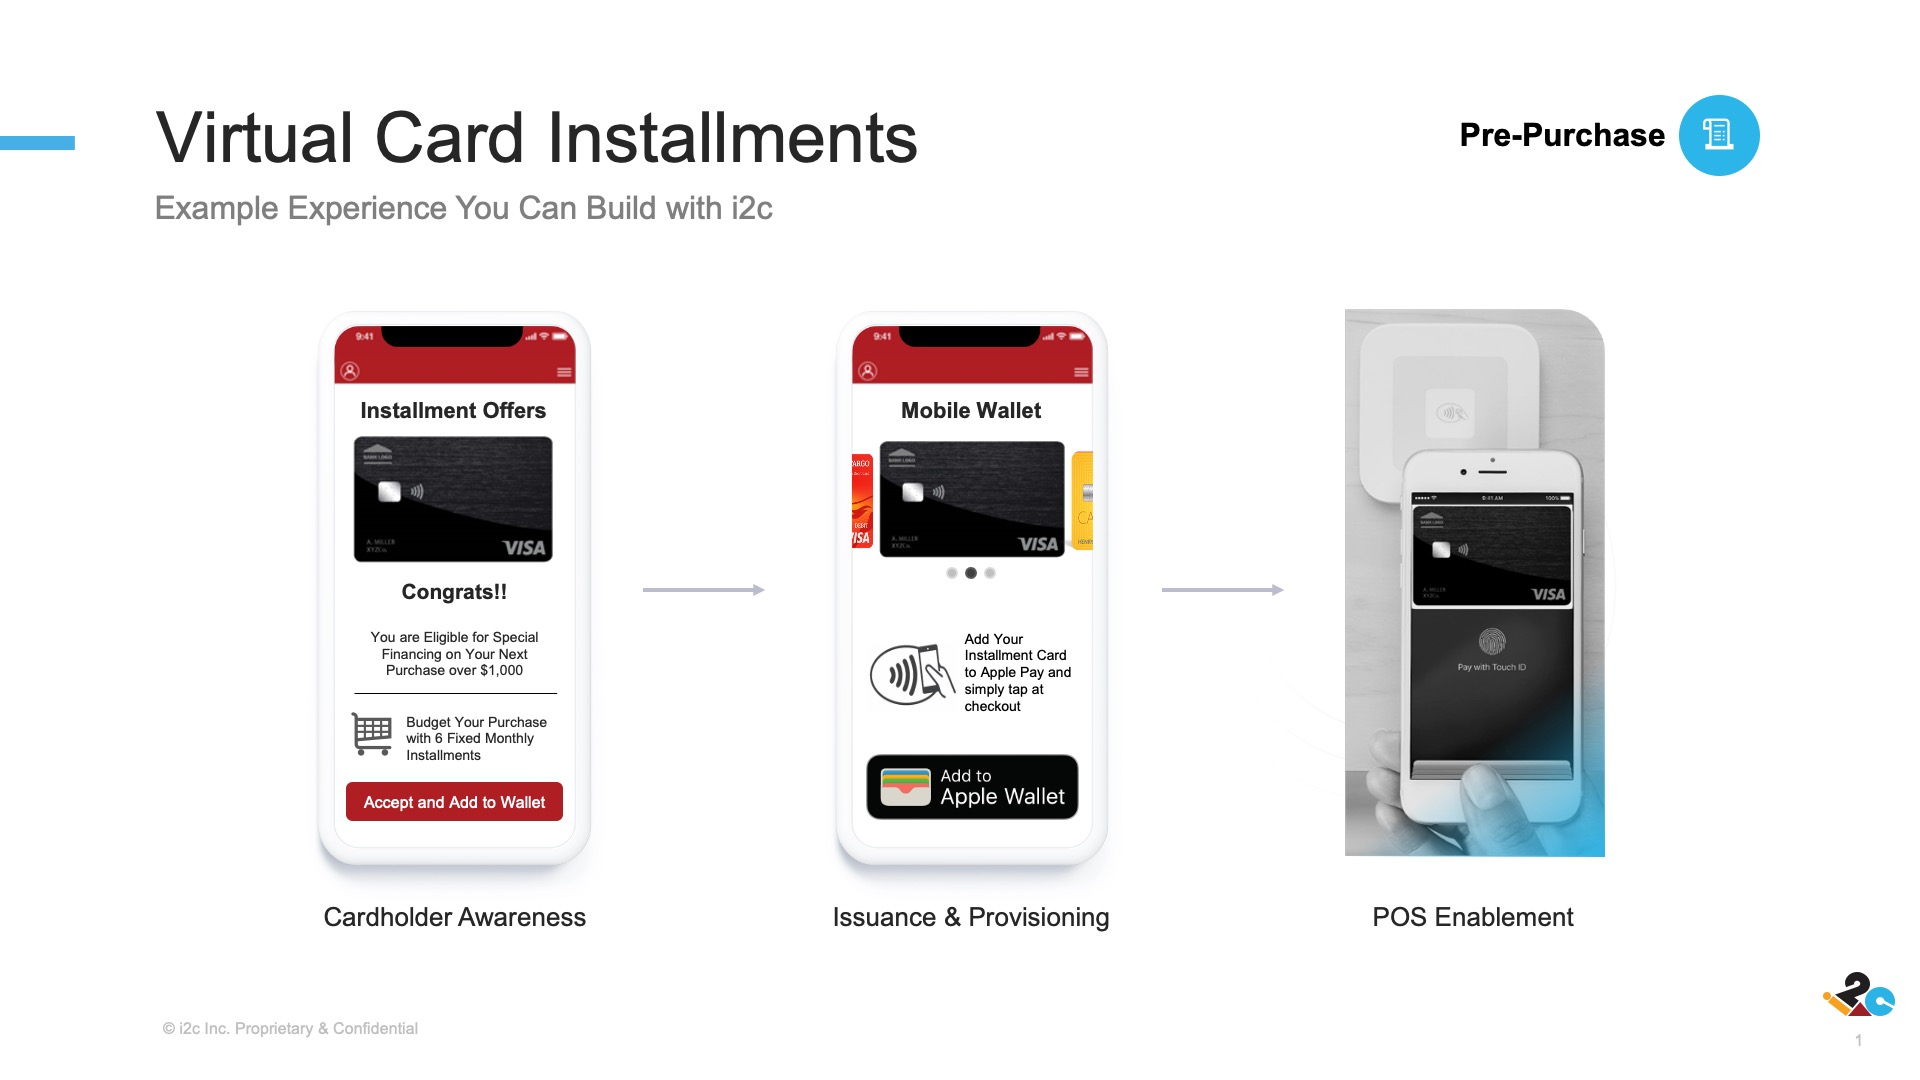 Image shows mobile user experience of being notified a card is eligible for installments